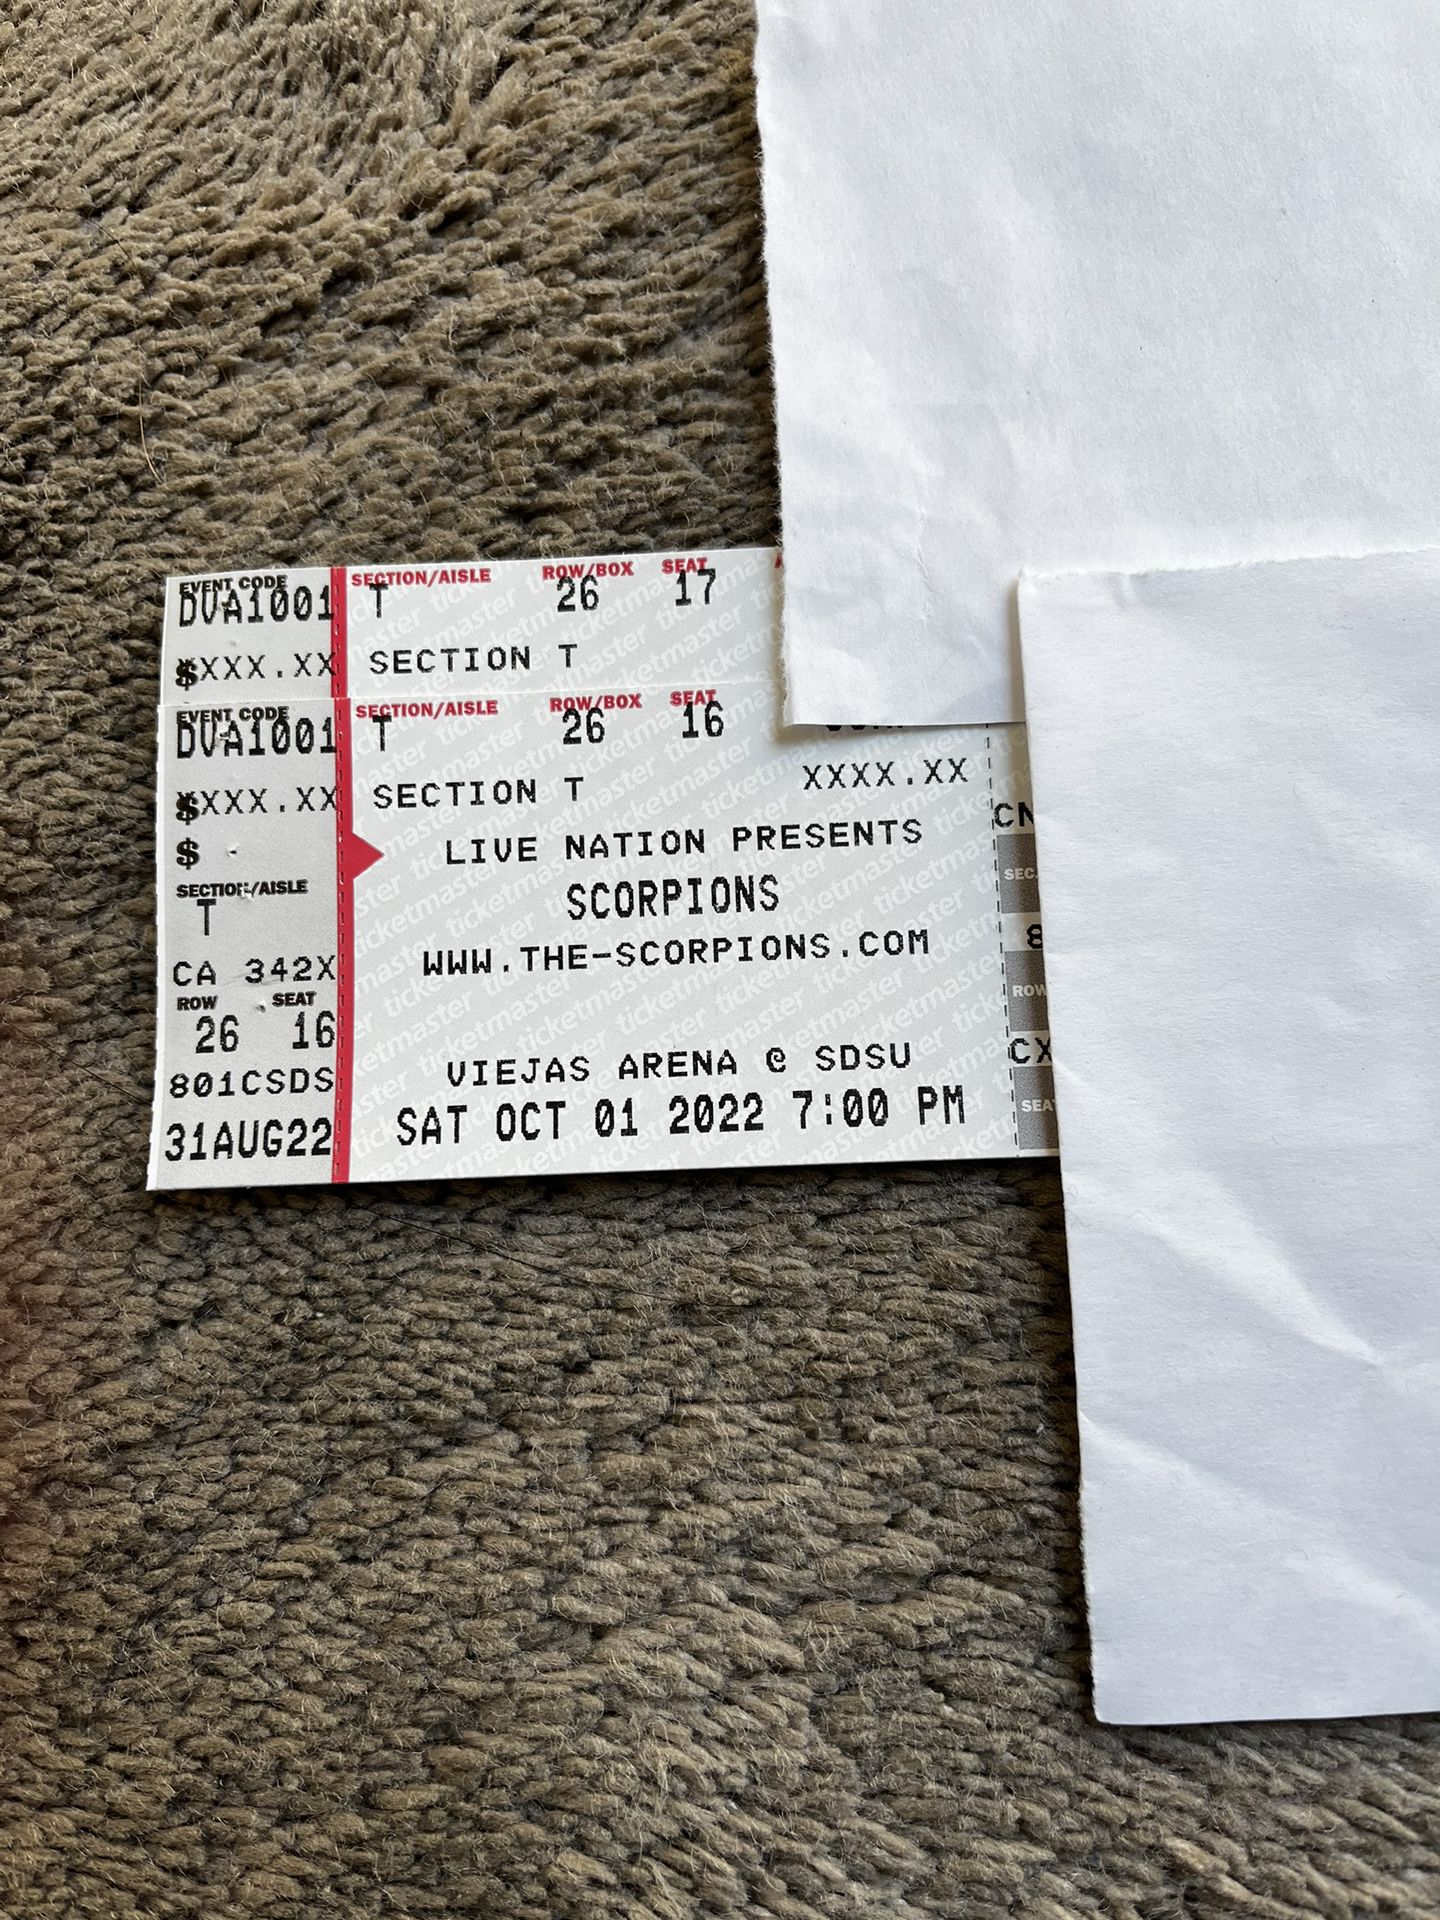 2 Tickets to Scorpions Concert Sat. Oct 1st